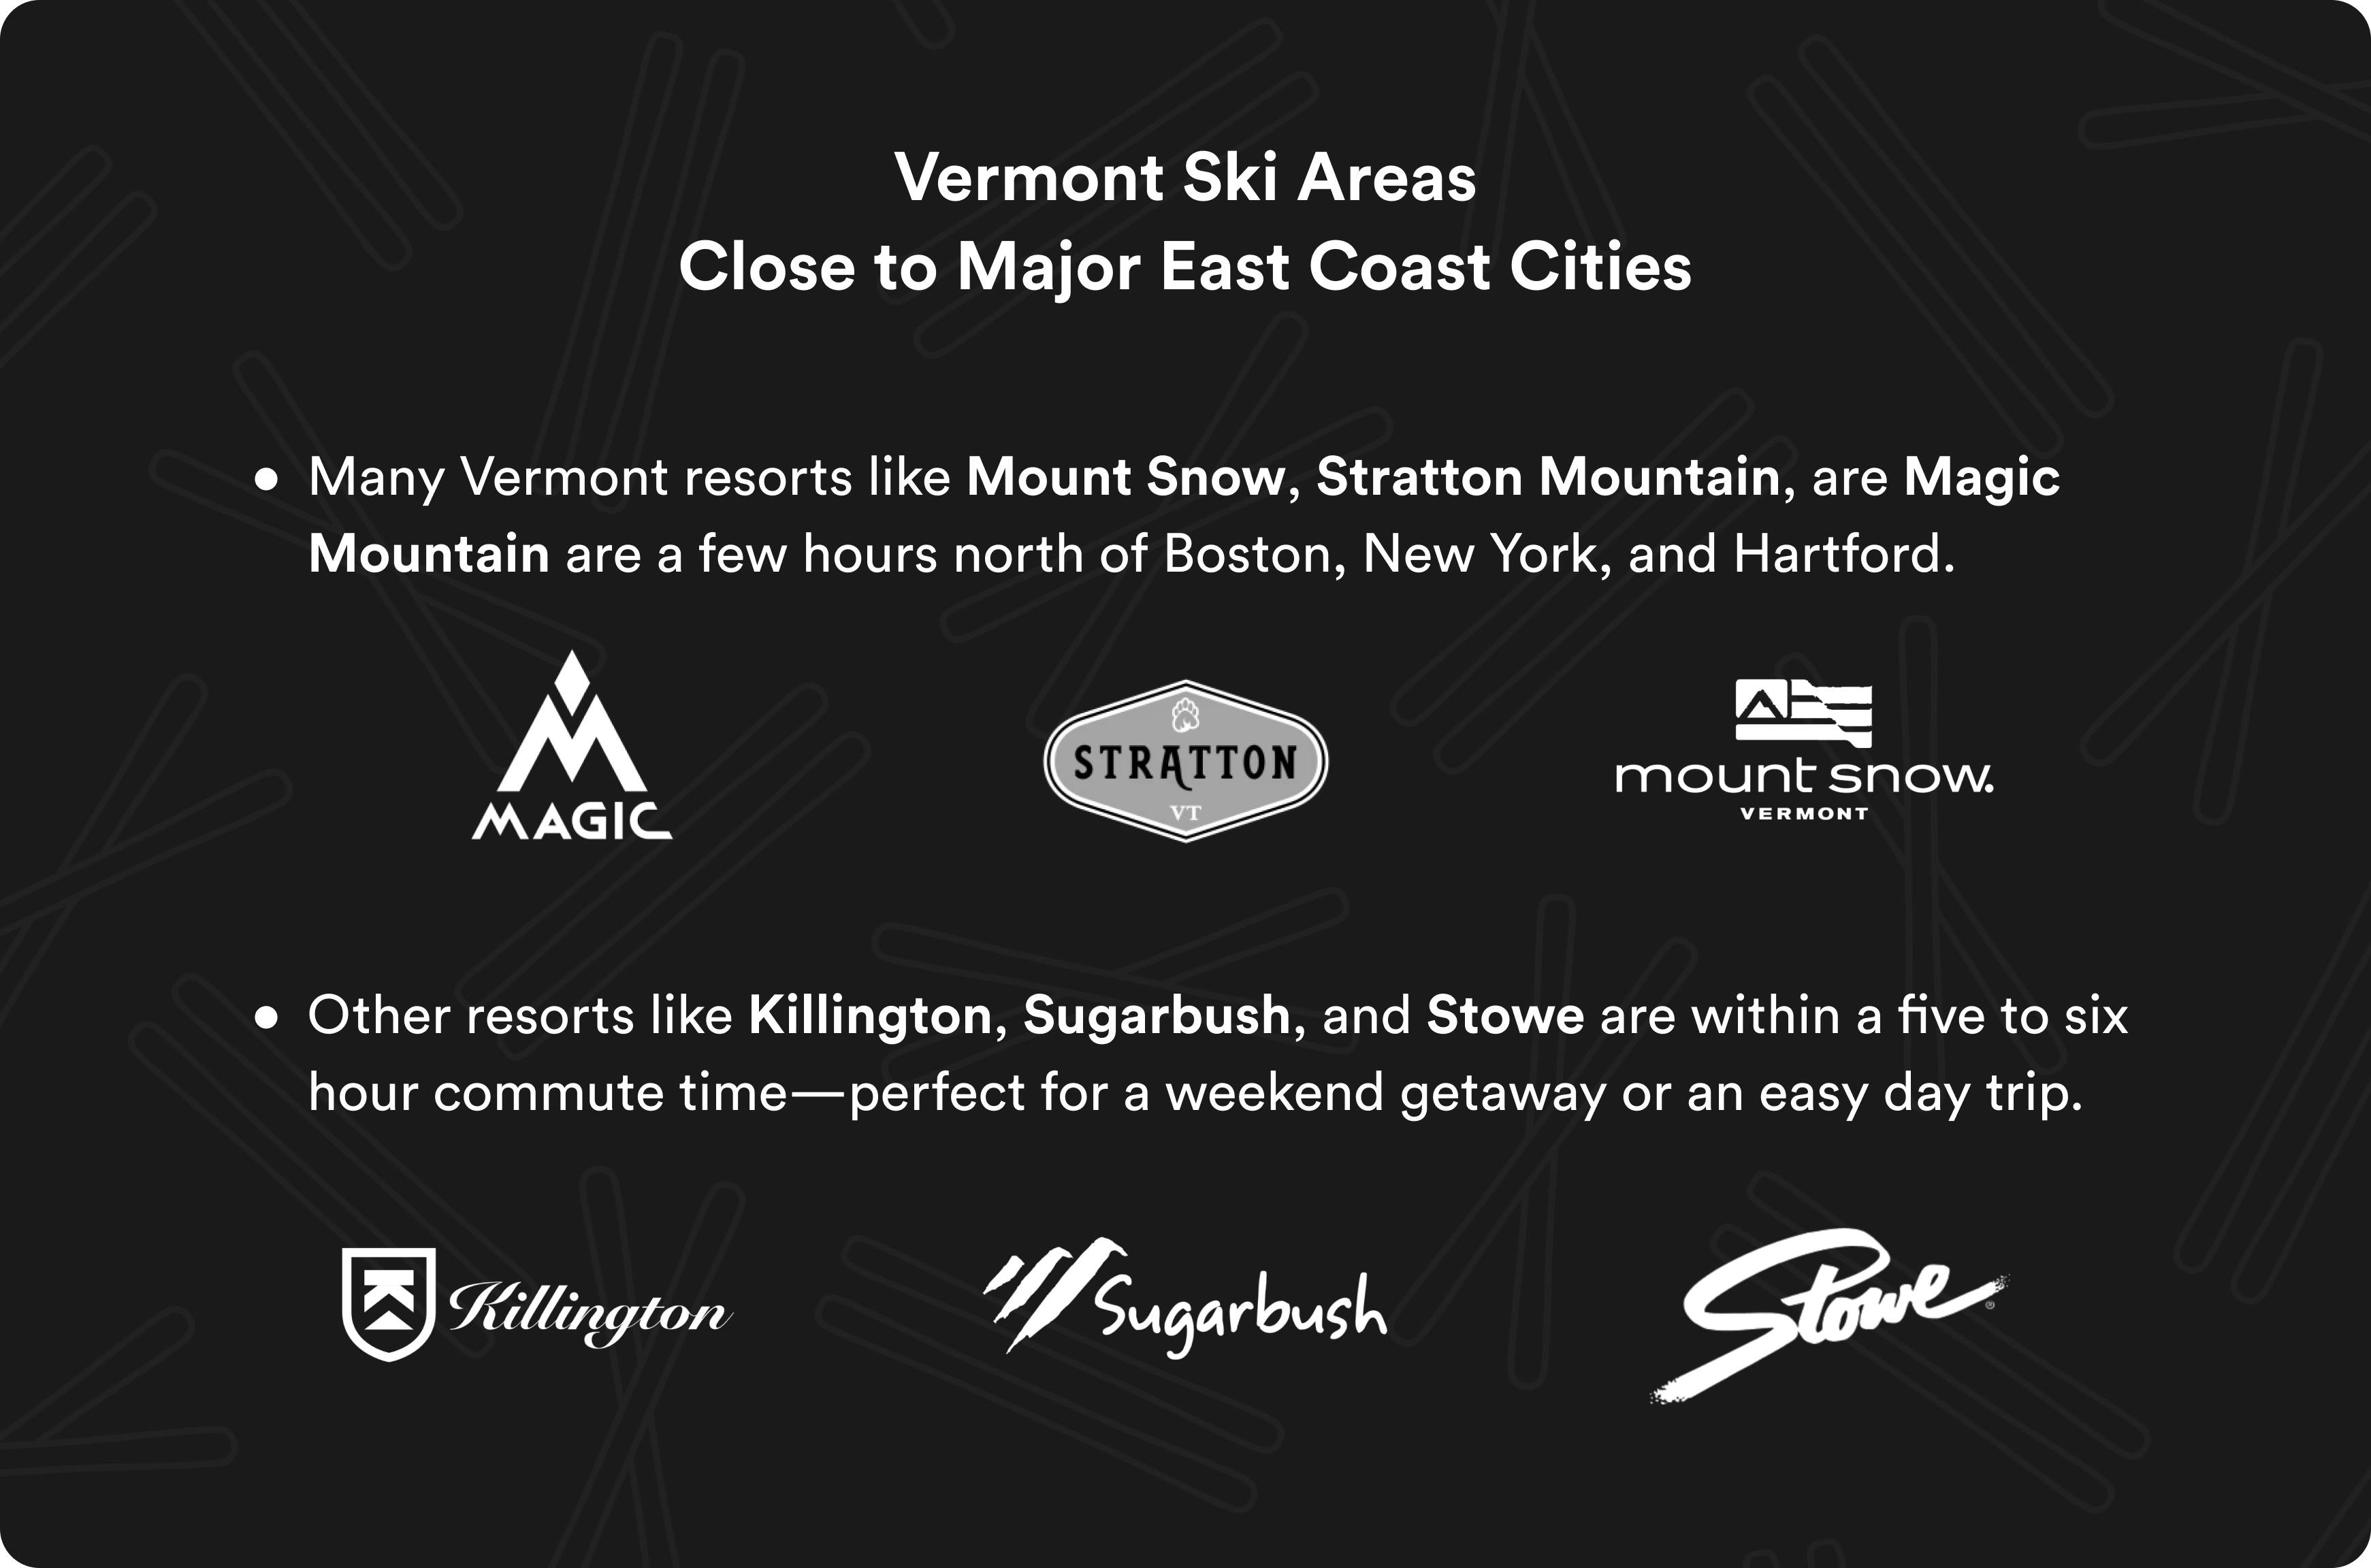 An infographic showing Vermont ski areas close to major East Coast cities